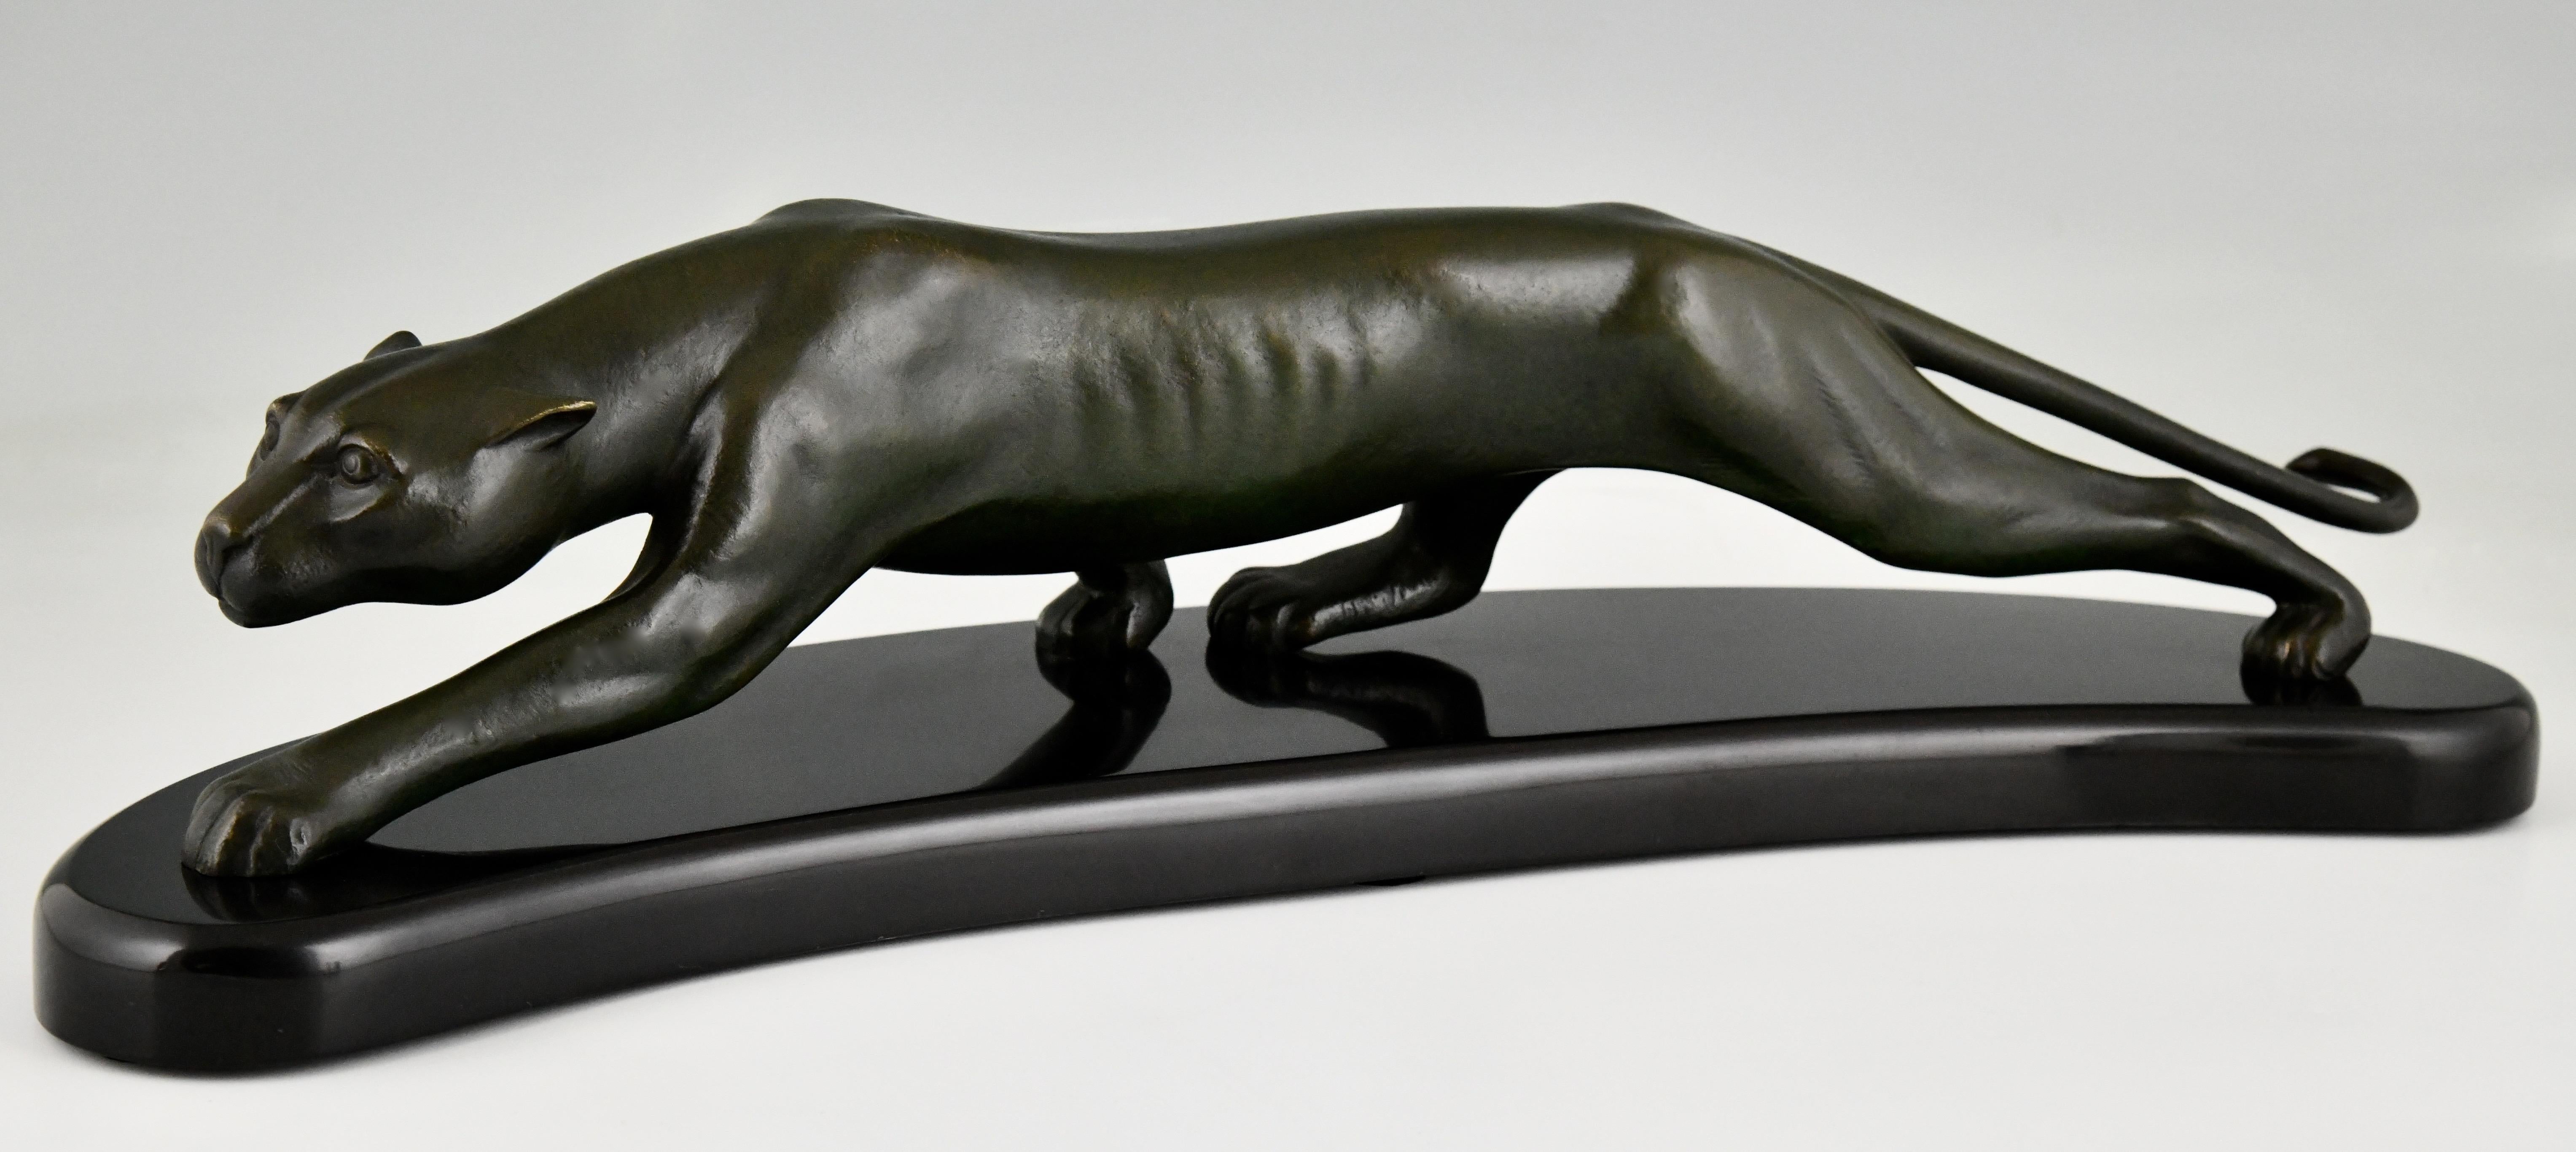 Art Deco bronze panther sculpture by Georges Lavroff.
Signed G. Lavroff in the bronze and numbered on a Belgian Black marble base.  
France 1925. 
This panther is illustrated in the book:
Georges Lavroff by Kastelyn and Mazzucotelli.